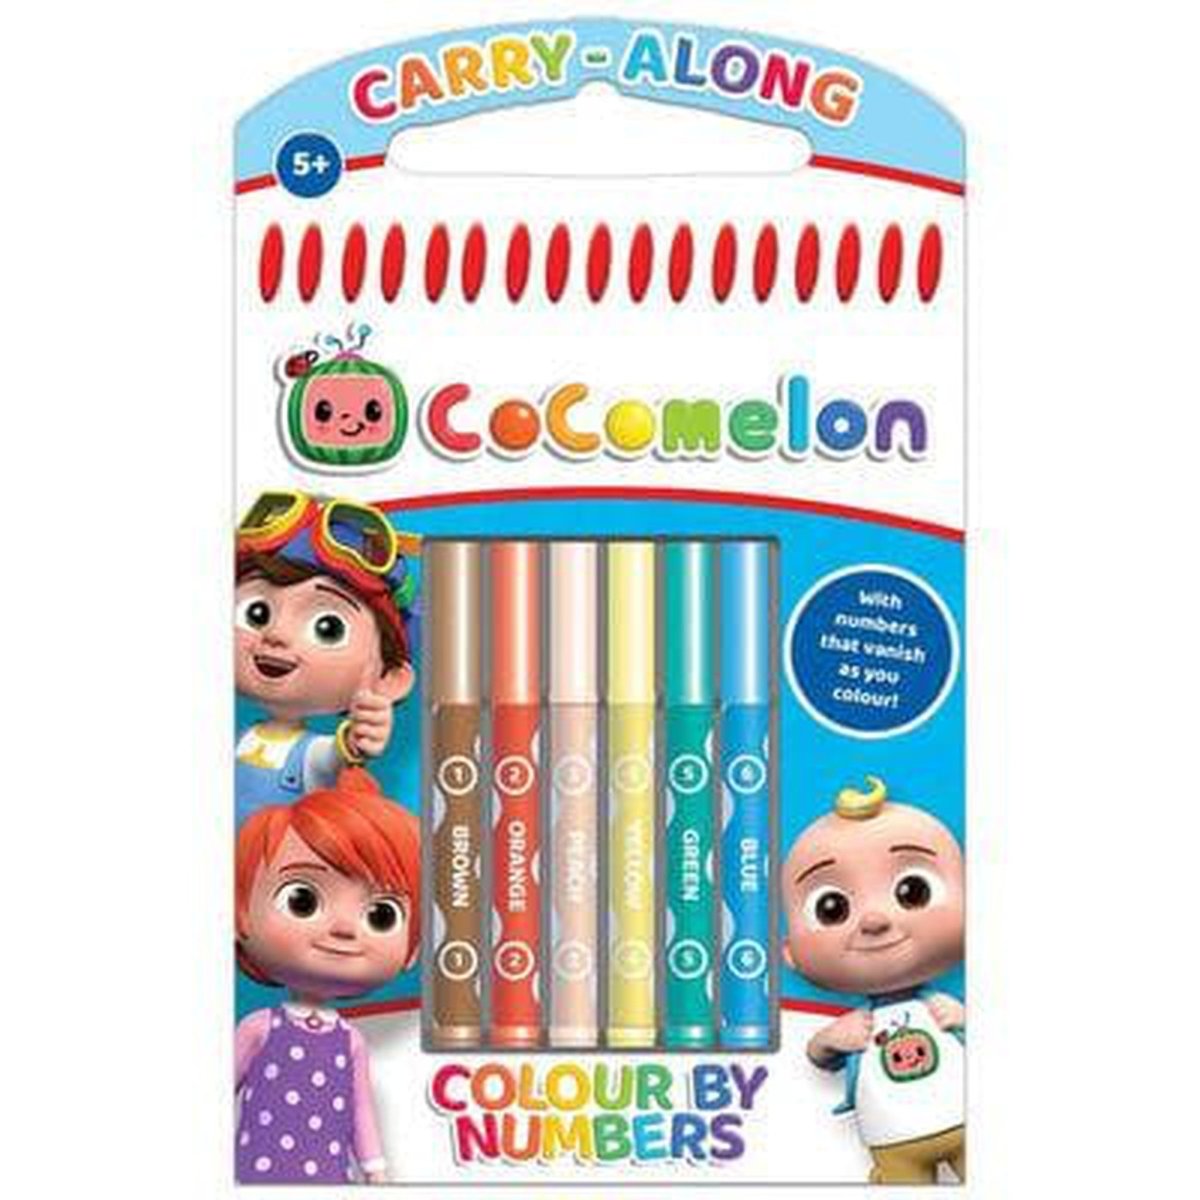 Cocomelon Colour by Numbers - Kids Party Craft